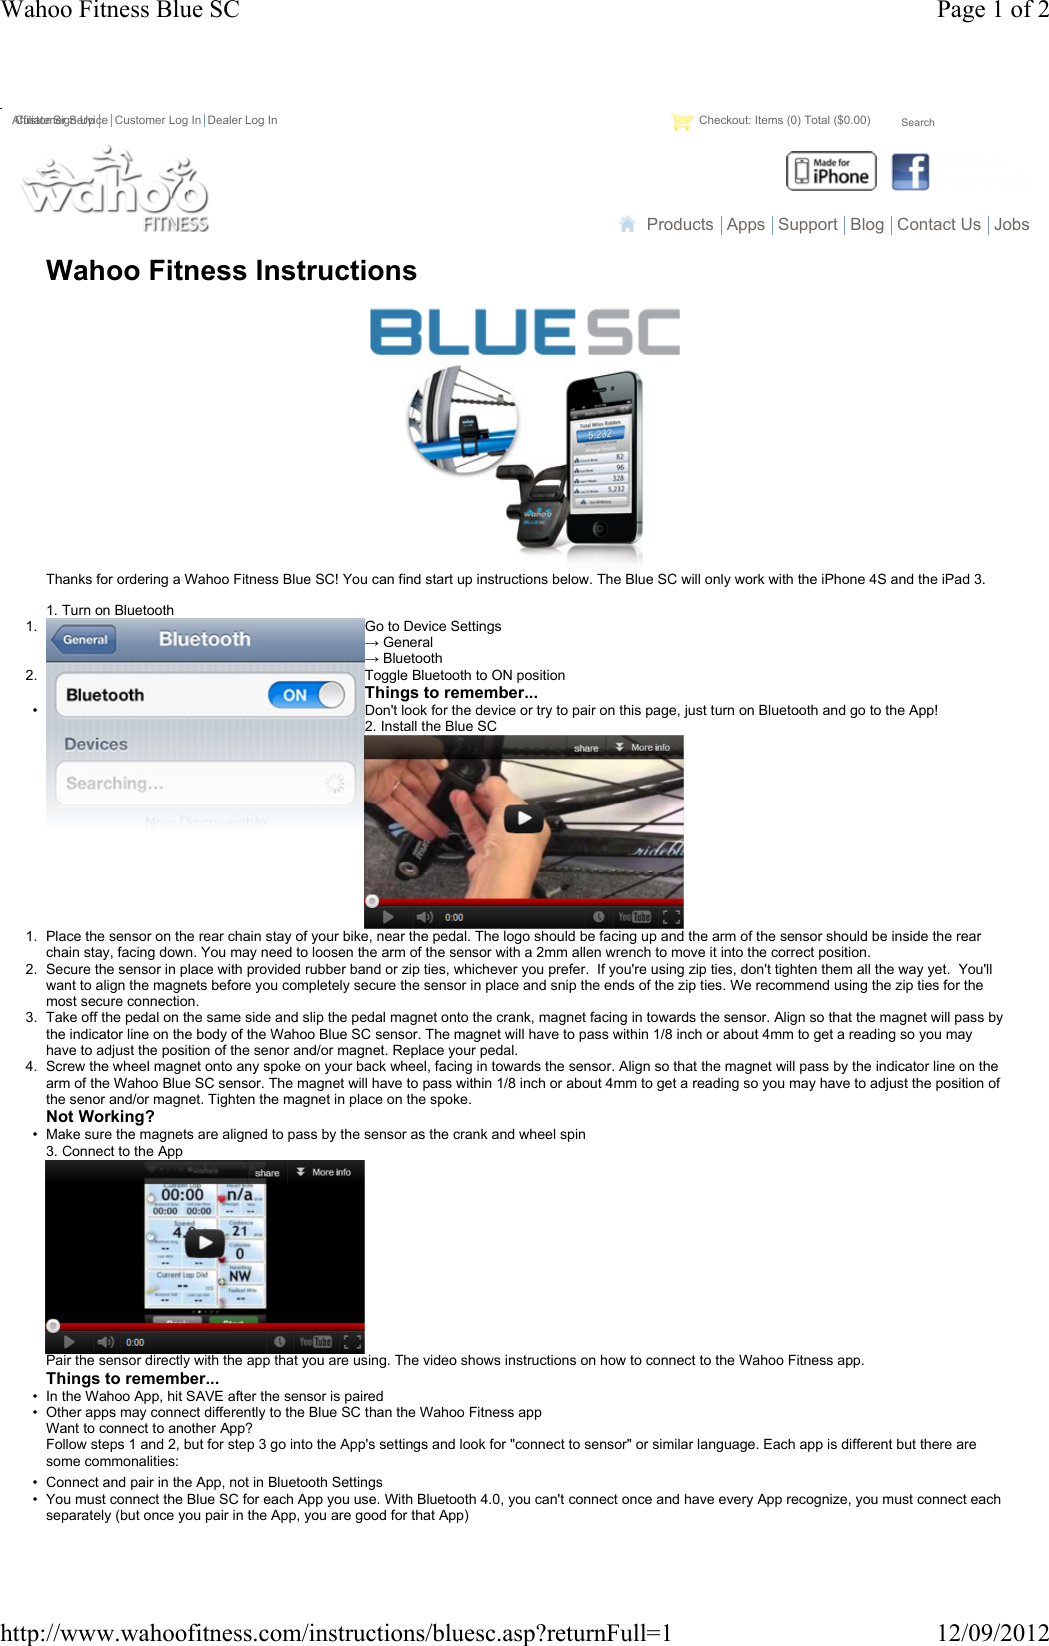 Wahoo Fitness InstructionsThanks for ordering a Wahoo Fitness Blue SC! You can find start up instructions below. The Blue SC will only work with the iPhone 4S and the iPad 3.1. Turn on Bluetooth1. Go to Device Settings→ General→ Bluetooth2. Toggle Bluetooth to ON positionThings to remember...• Don&apos;t look for the device or try to pair on this page, just turn on Bluetooth and go to the App!2. Install the Blue SC1. Place the sensor on the rear chain stay of your bike, near the pedal. The logo should be facing up and the arm of the sensor should be inside the rear chain stay, facing down. You may need to loosen the arm of the sensor with a 2mm allen wrench to move it into the correct position. 2. Secure the sensor in place with provided rubber band or zip ties, whichever you prefer.  If you&apos;re using zip ties, don&apos;t tighten them all the way yet.  You&apos;ll want to align the magnets before you completely secure the sensor in place and snip the ends of the zip ties. We recommend using the zip ties for the most secure connection.3. Take off the pedal on the same side and slip the pedal magnet onto the crank, magnet facing in towards the sensor. Align so that the magnet will pass by the indicator line on the body of the Wahoo Blue SC sensor. The magnet will have to pass within 1/8 inch or about 4mm to get a reading so you may have to adjust the position of the senor and/or magnet. Replace your pedal.4. Screw the wheel magnet onto any spoke on your back wheel, facing in towards the sensor. Align so that the magnet will pass by the indicator line on the arm of the Wahoo Blue SC sensor. The magnet will have to pass within 1/8 inch or about 4mm to get a reading so you may have to adjust the position of the senor and/or magnet. Tighten the magnet in place on the spoke.Not Working?• Make sure the magnets are aligned to pass by the sensor as the crank and wheel spin3. Connect to the AppPair the sensor directly with the app that you are using. The video shows instructions on how to connect to the Wahoo Fitness app.Things to remember...• In the Wahoo App, hit SAVE after the sensor is paired• Other apps may connect differently to the Blue SC than the Wahoo Fitness appWant to connect to another App?Follow steps 1 and 2, but for step 3 go into the App&apos;s settings and look for &quot;connect to sensor&quot; or similar language. Each app is different but there are some commonalities:• Connect and pair in the App, not in Bluetooth Settings• You must connect the Blue SC for each App you use. With Bluetooth 4.0, you can&apos;t connect once and have every App recognize, you must connect each separately (but once you pair in the App, you are good for that App)Products Apps Support Blog Contact Us JobsCustomer Service Customer Log In Dealer Log In Checkout: Items (0) Total ($0.00)SearchAffiliate Sign UpPage 1 of 2Wahoo Fitness Blue SC12/09/2012http://www.wahoofitness.com/instructions/bluesc.asp?returnFull=1